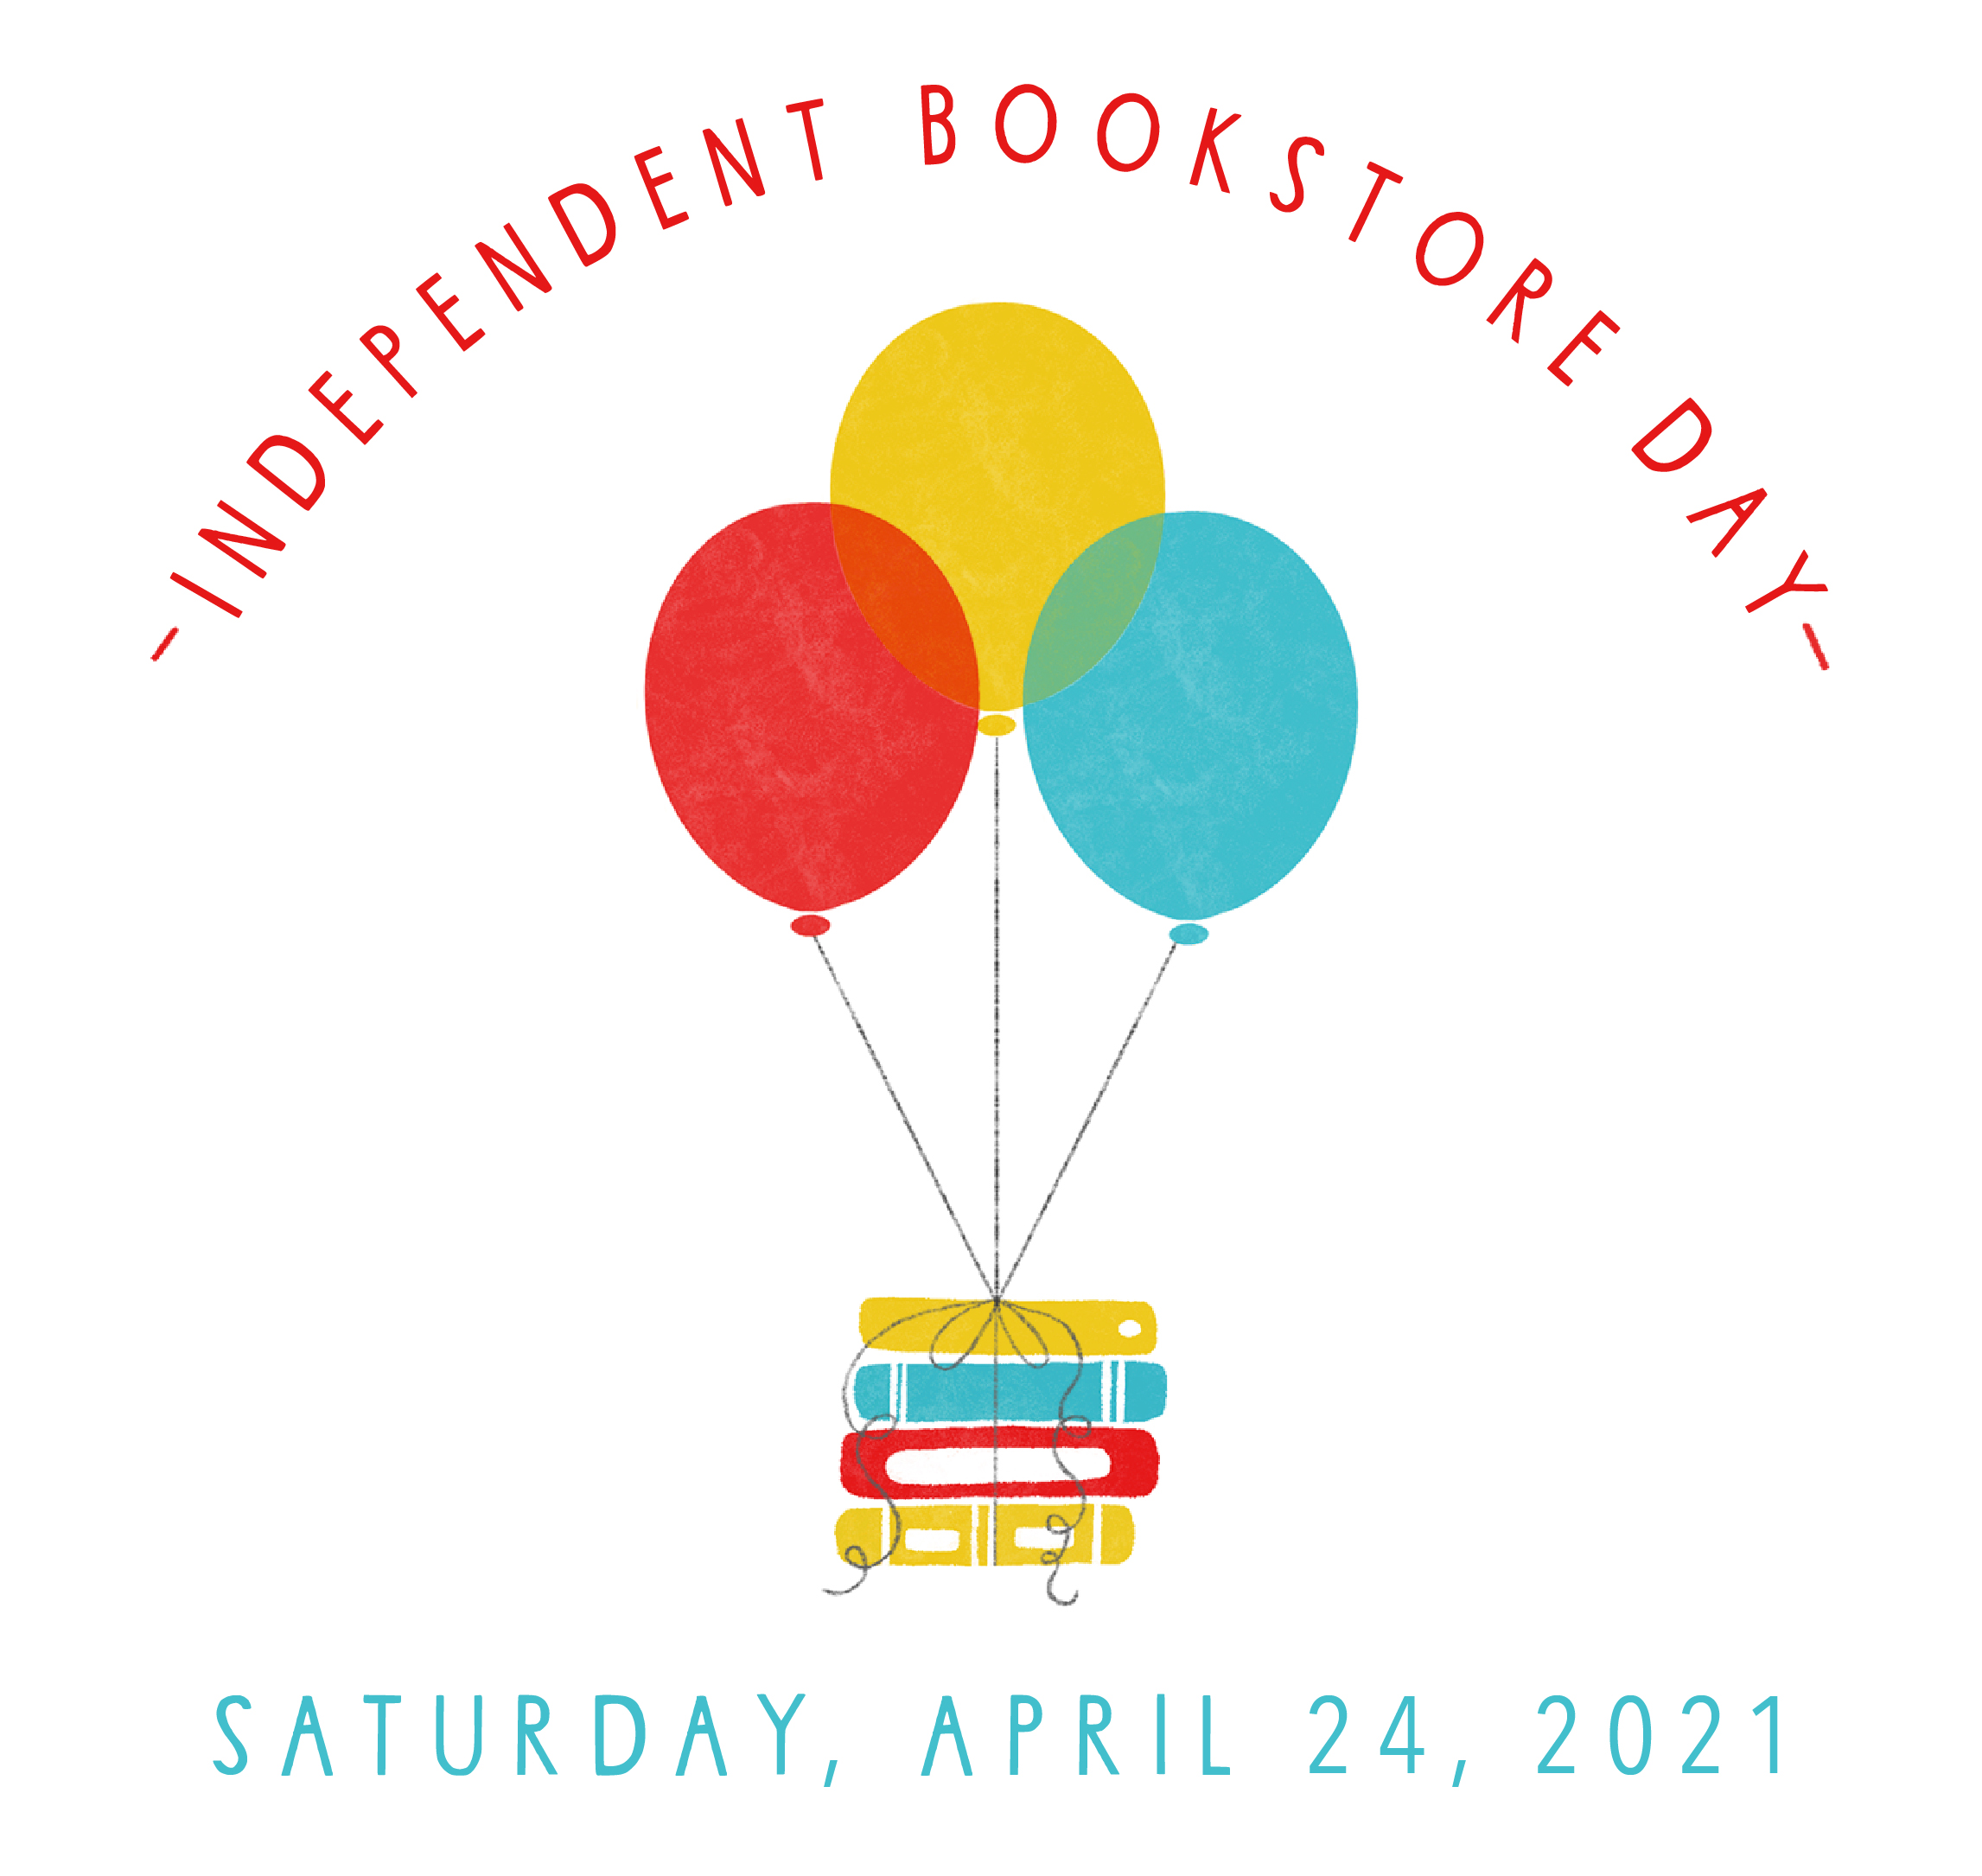 Independent Bookstore Day is Saturday, April 24th 2021.